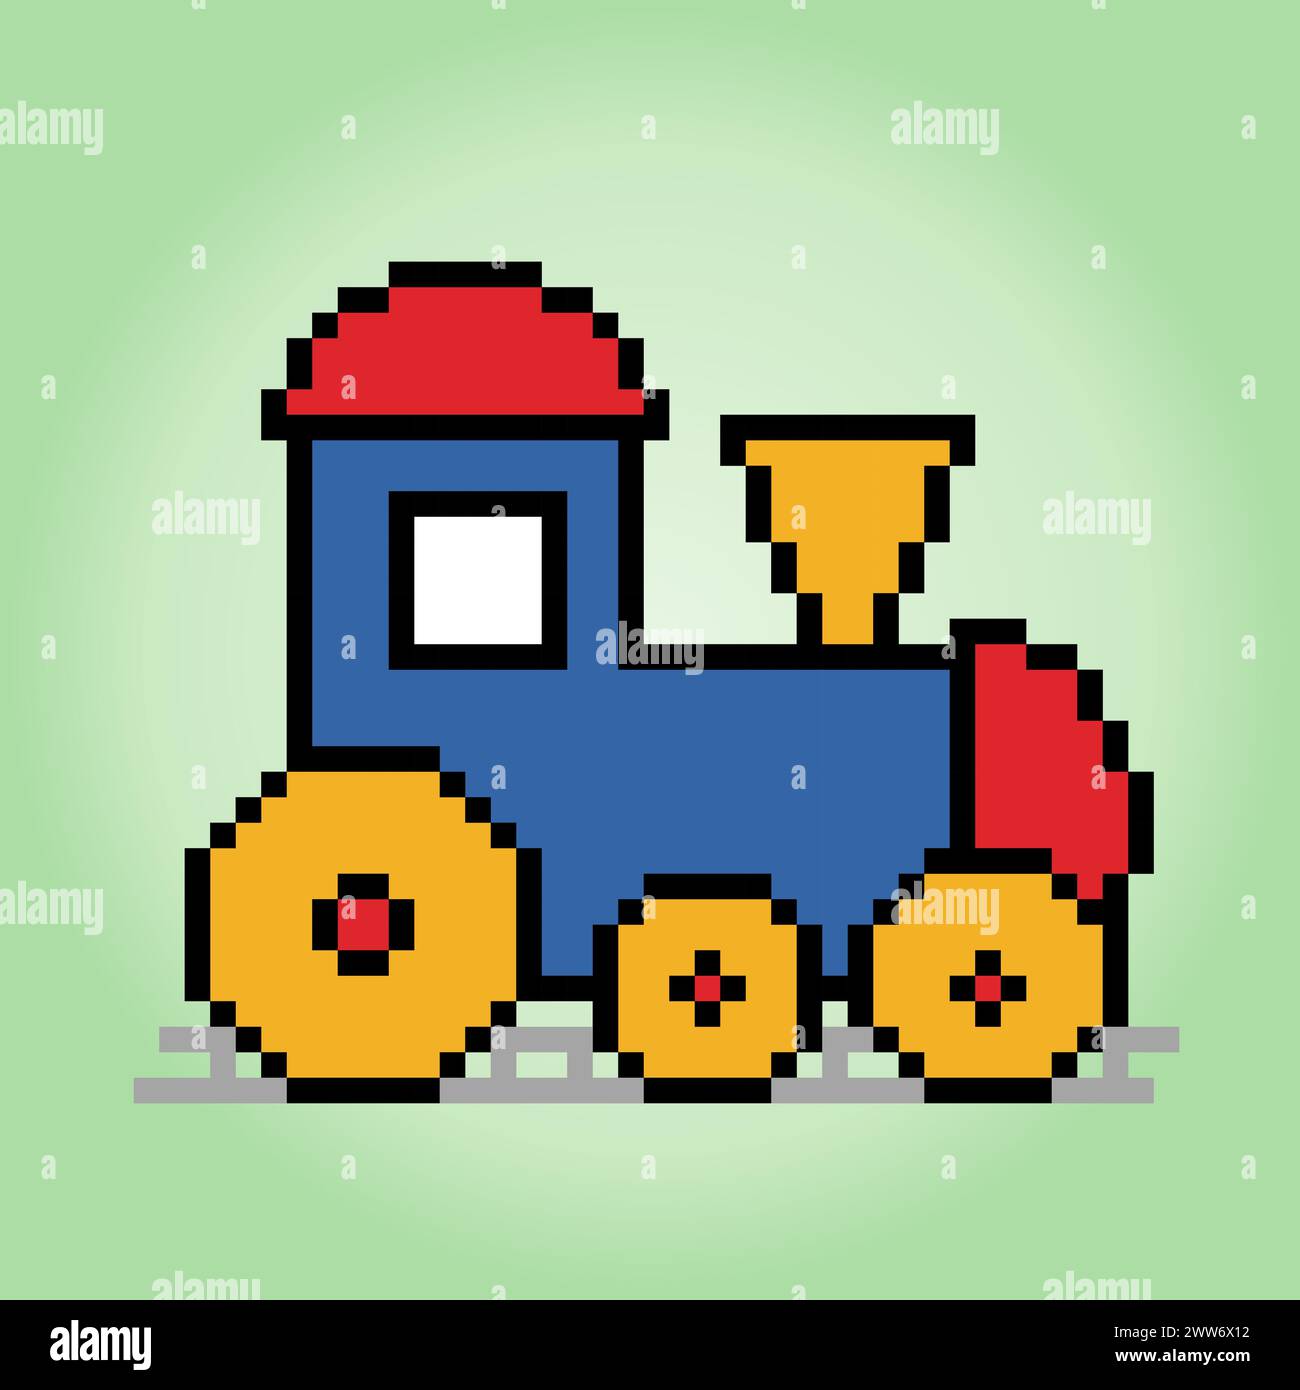 8 bit pixel train. toys pixel in vector illustrations for game assets and cross stitch patterns. Stock Vector